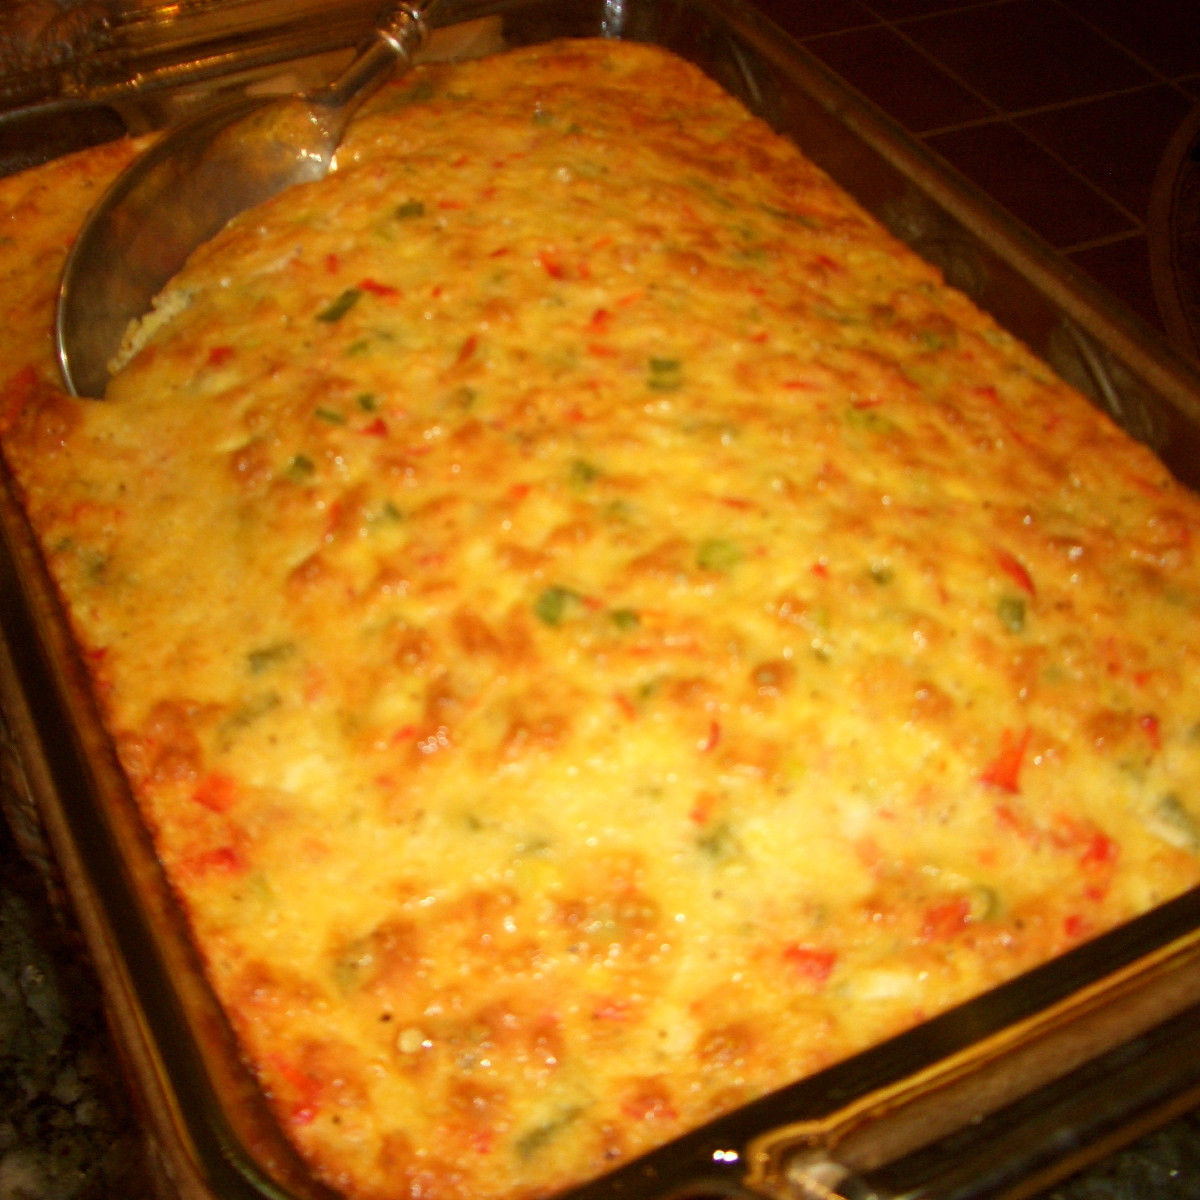 Easy Breakfast Quiche Recipe
 PREPARE AN EASY MAKE AHEAD BRUNCH WITH THIS CRUSTLESS